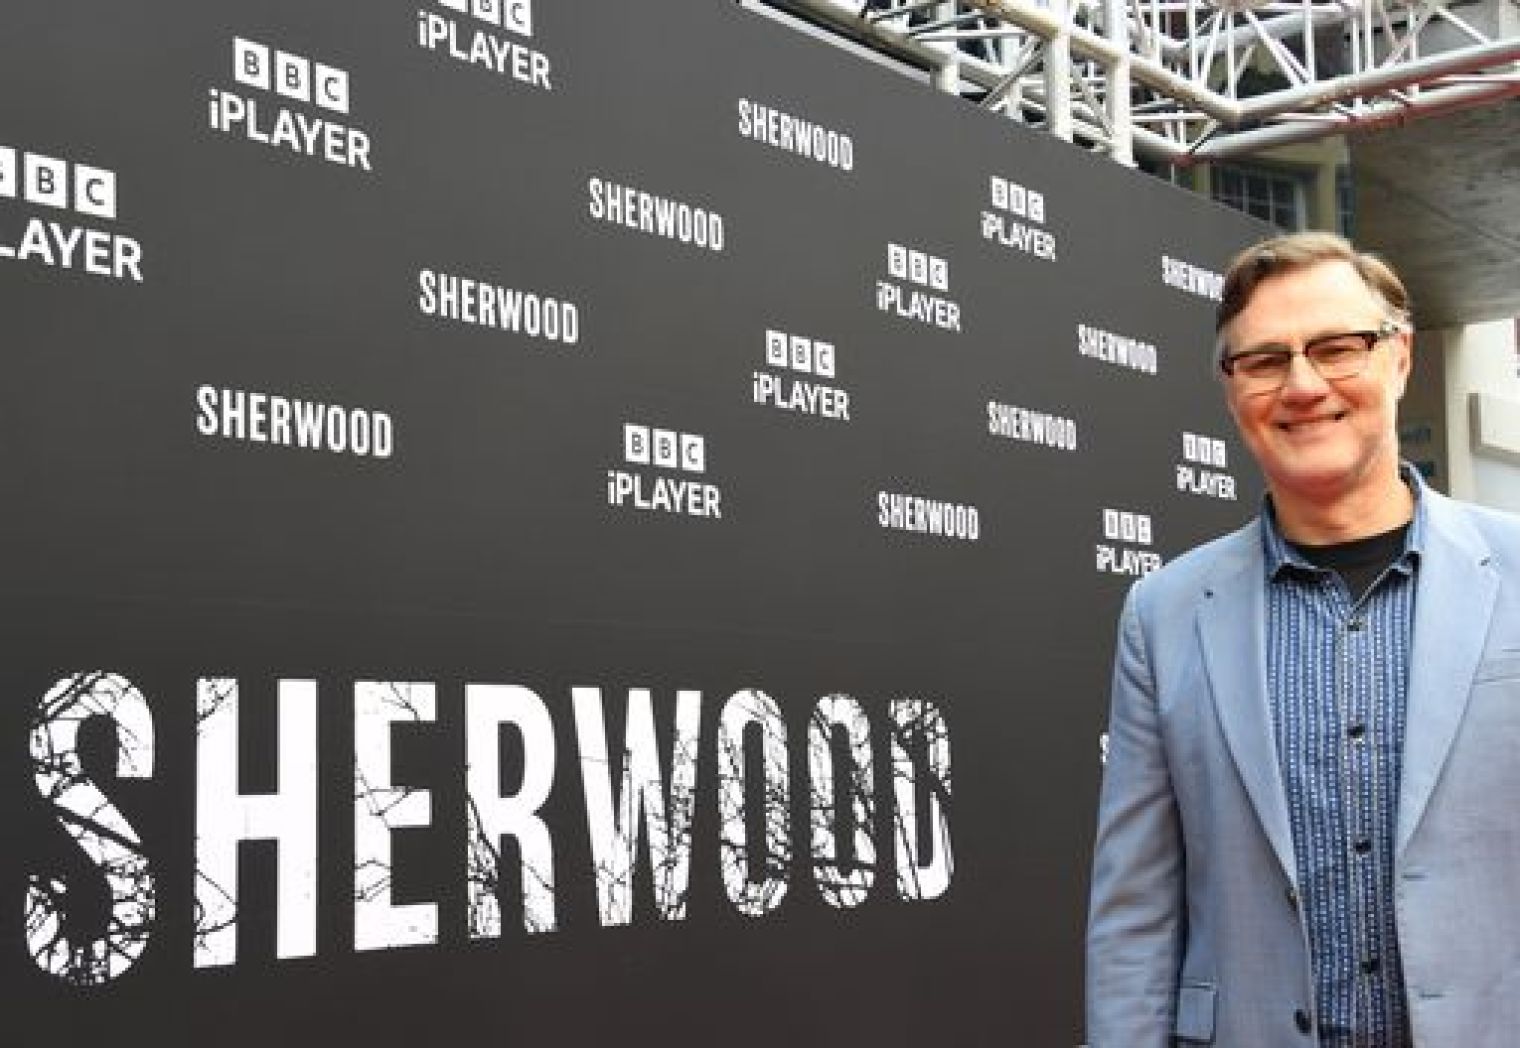 David Morrissey attended the red carpet premiere of new BBC crime drama Sherwood in Nottingham last night.  